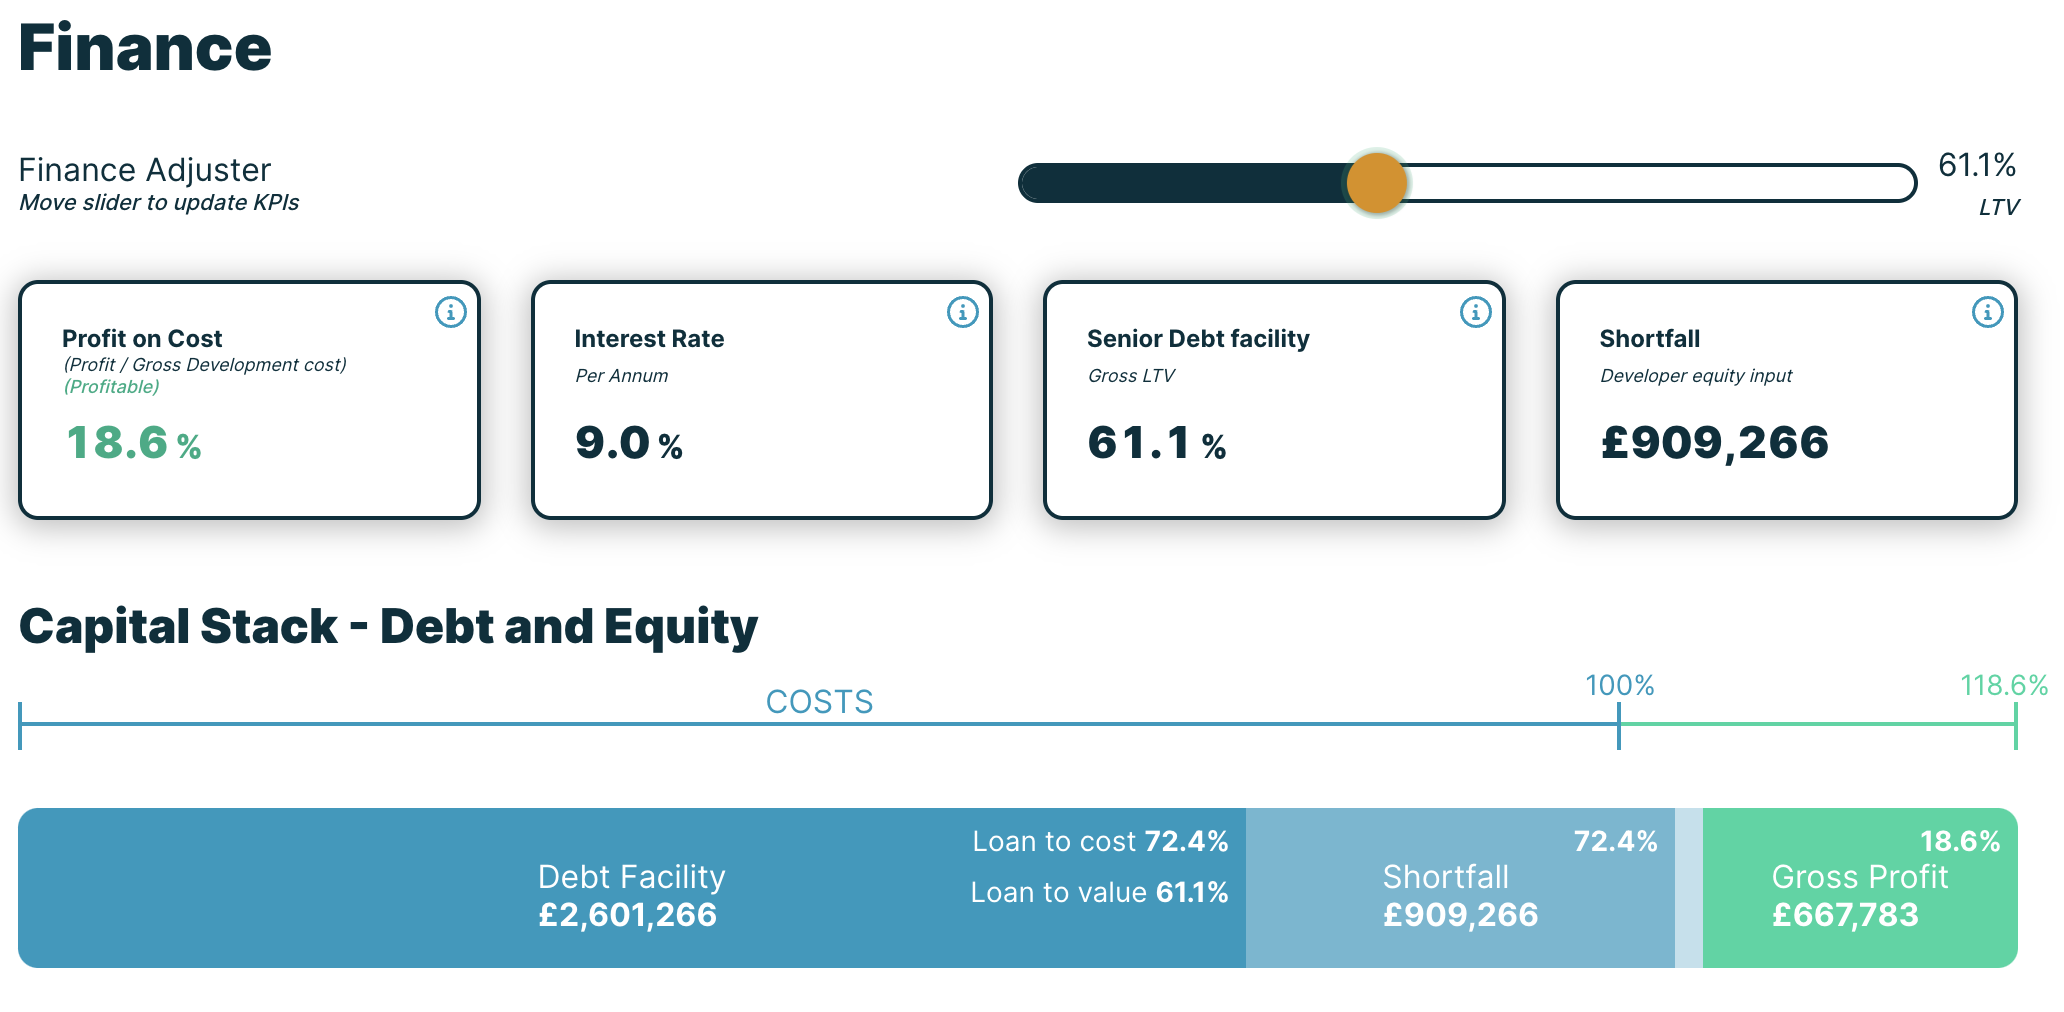 ADJUST YOUR DEBT AND EQUITY REQUIREMENTS TO SEE THE LIVE MARKET COST AND CASH INPUT.